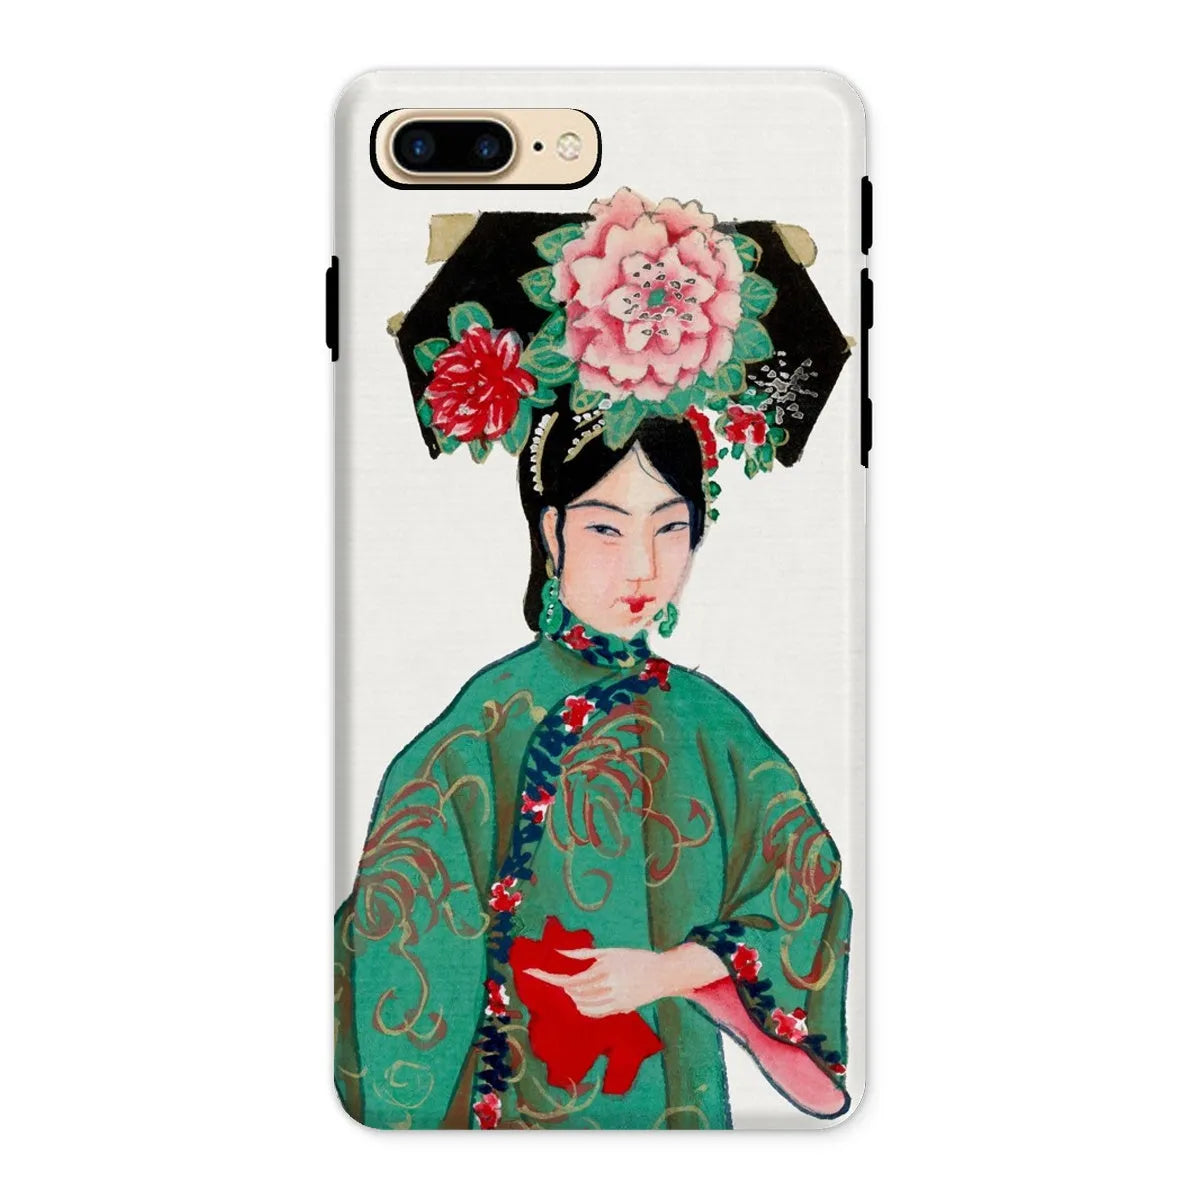 Chinese Noblewoman In Manchu Couture Art Phone Case - Iphone 8 Plus / Matte - Mobile Phone Cases - Aesthetic Art